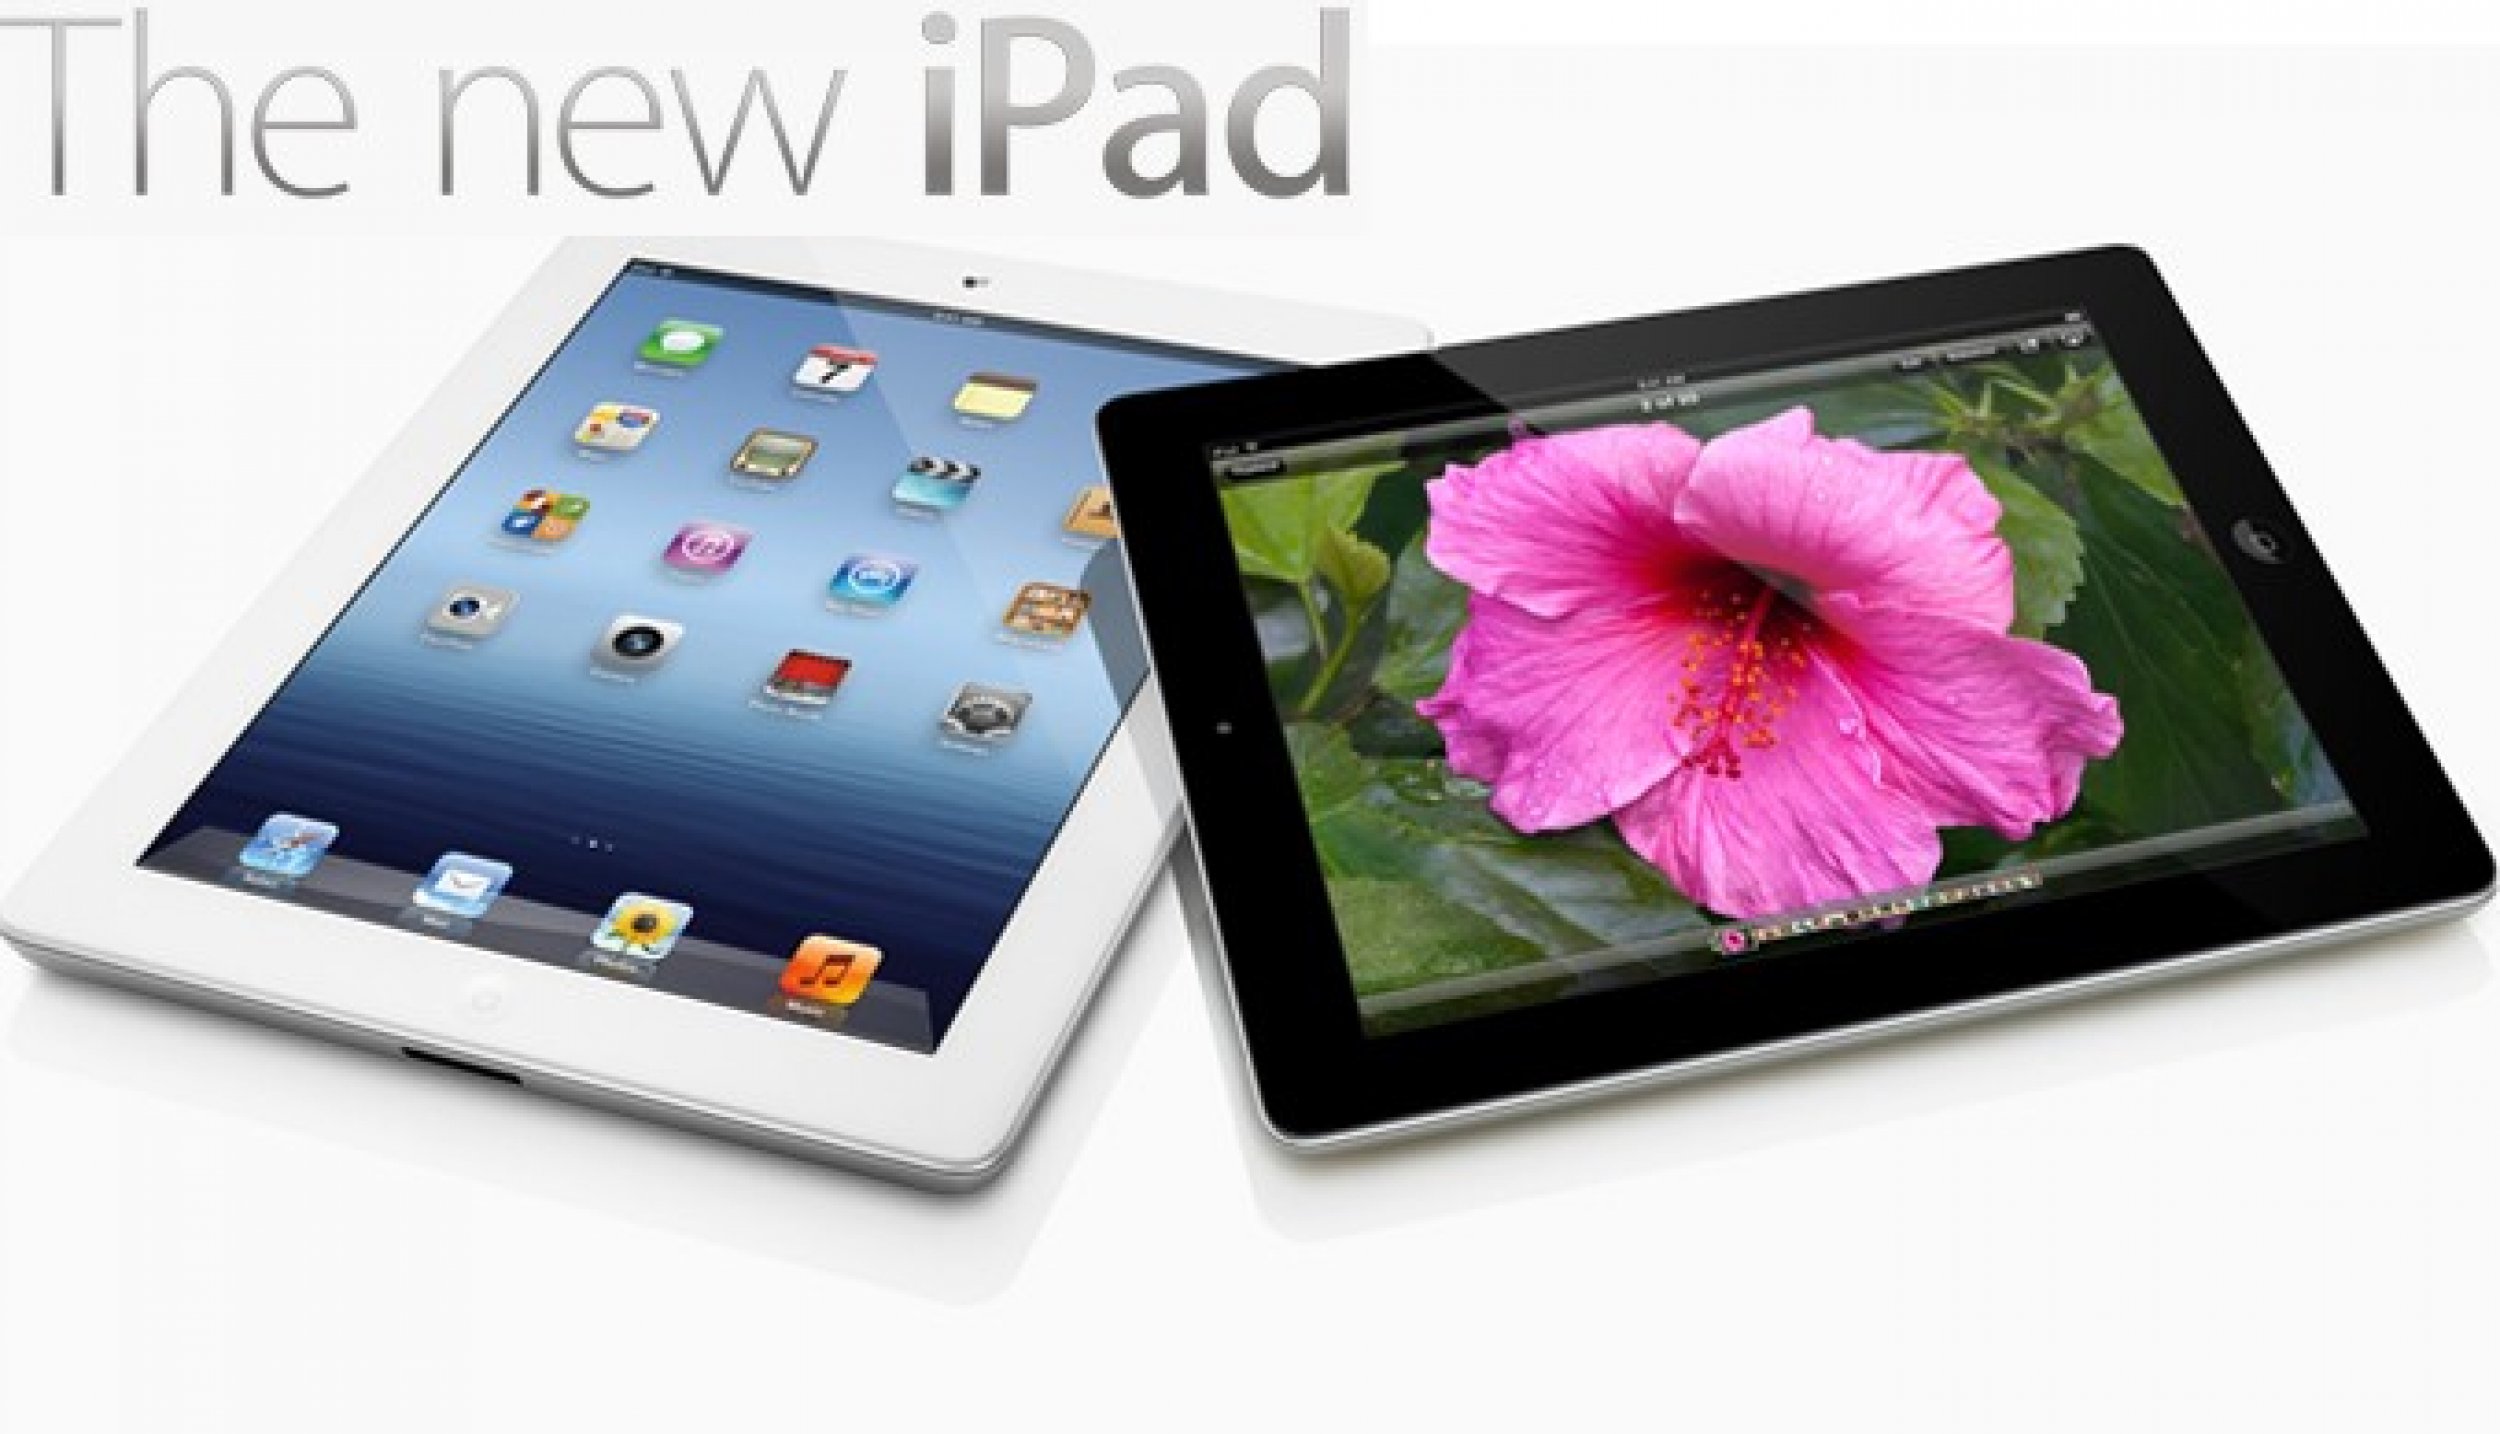 Apples New iPad Or iPad 2 Too Many Problems With Latest Tablet Should You Stick To The Old One